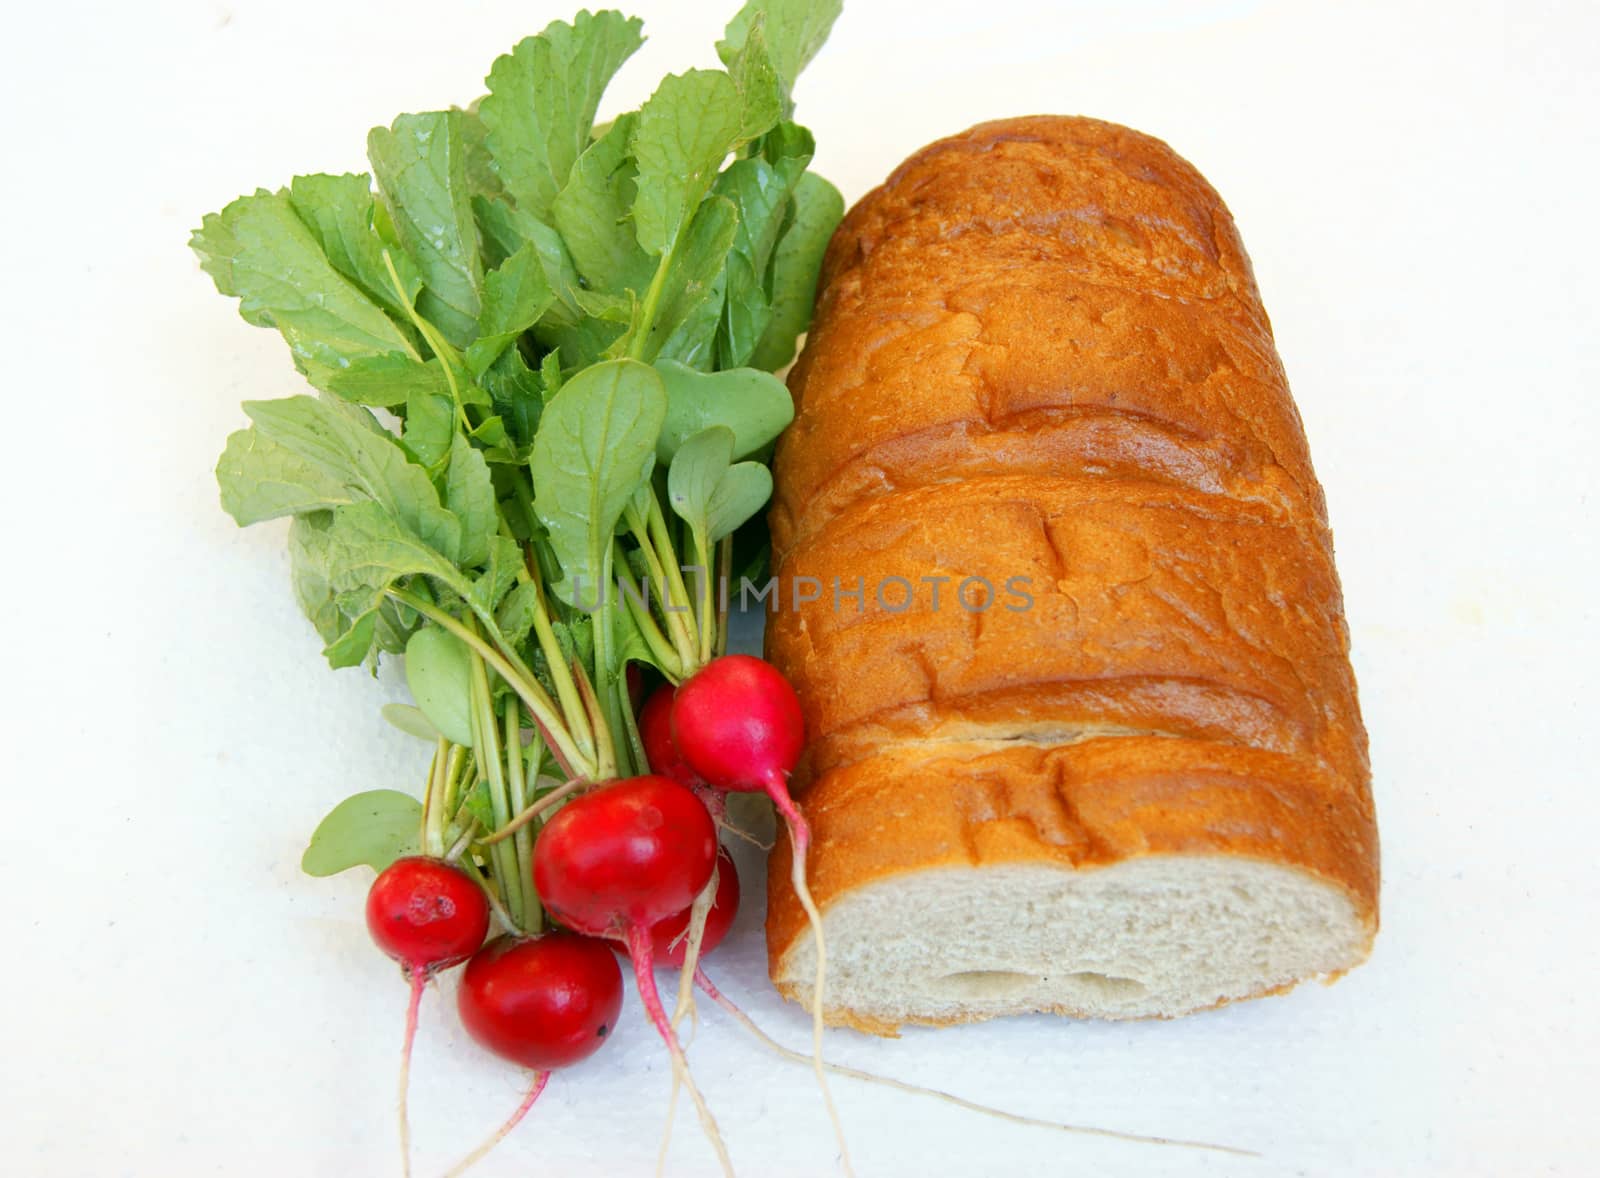 Vegetables radish and bread by cobol1964